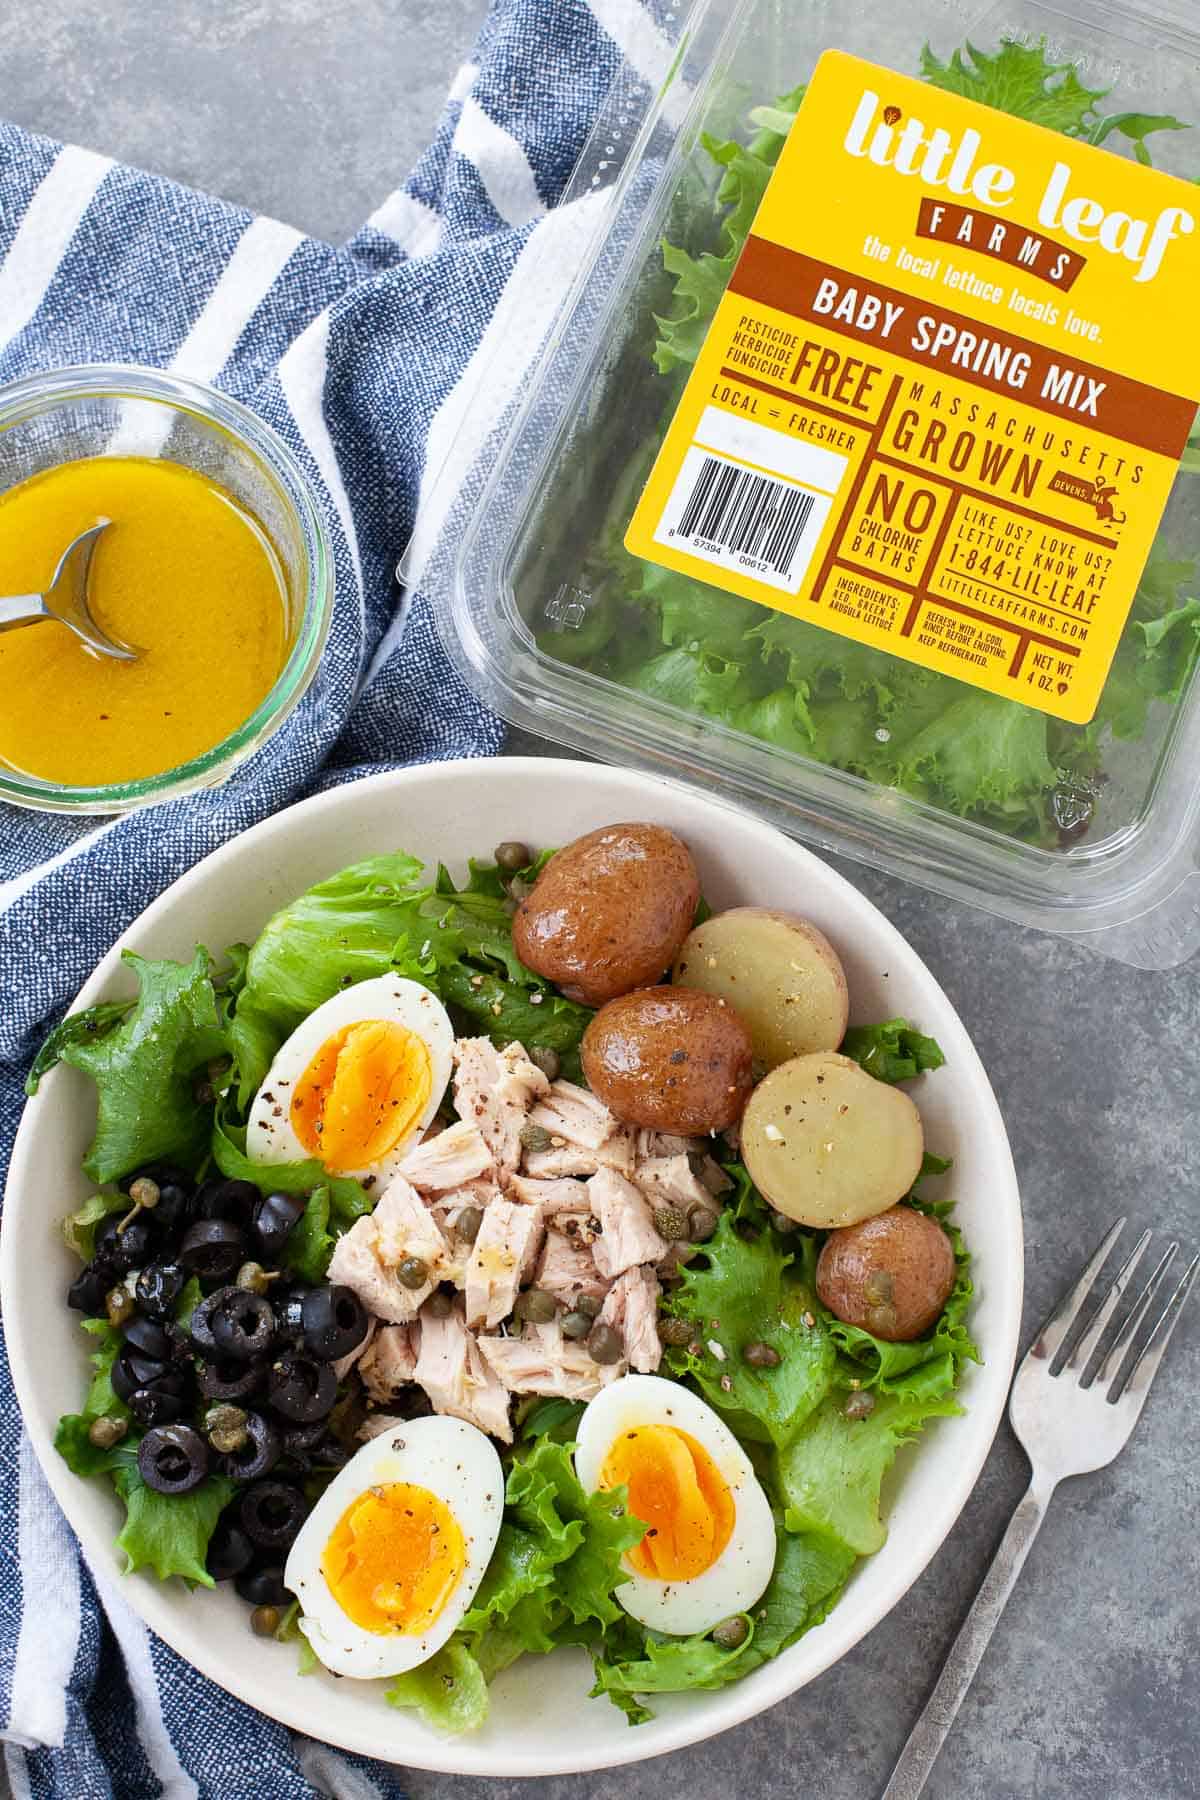 Niçoise Salad made with Little Leaf Farms baby spring mix